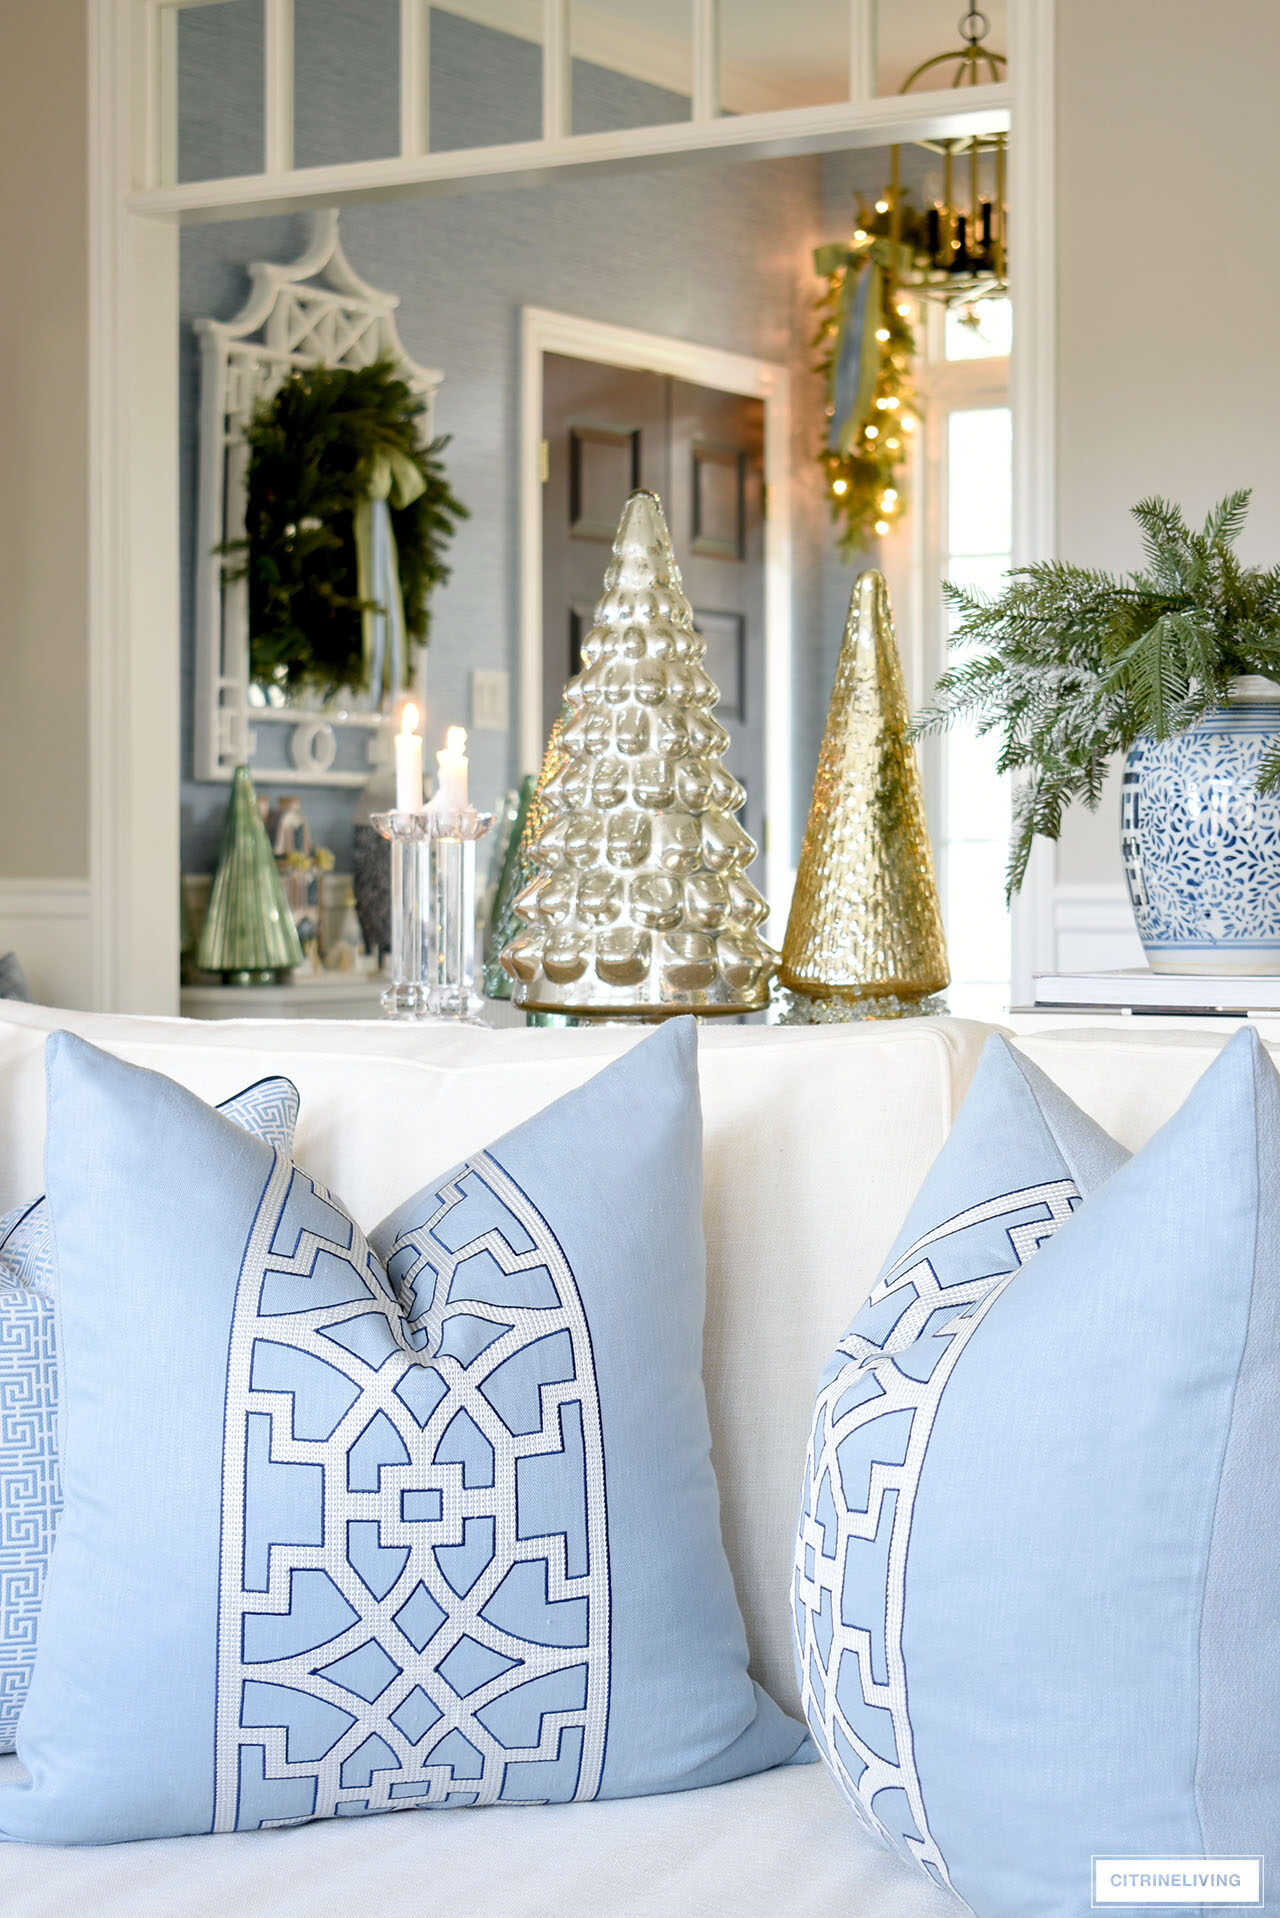 Blue and white throw pillows on a white sofa, Christmas trees in mercury glass and a blue and white ginger jar arranged with holiday greenery.